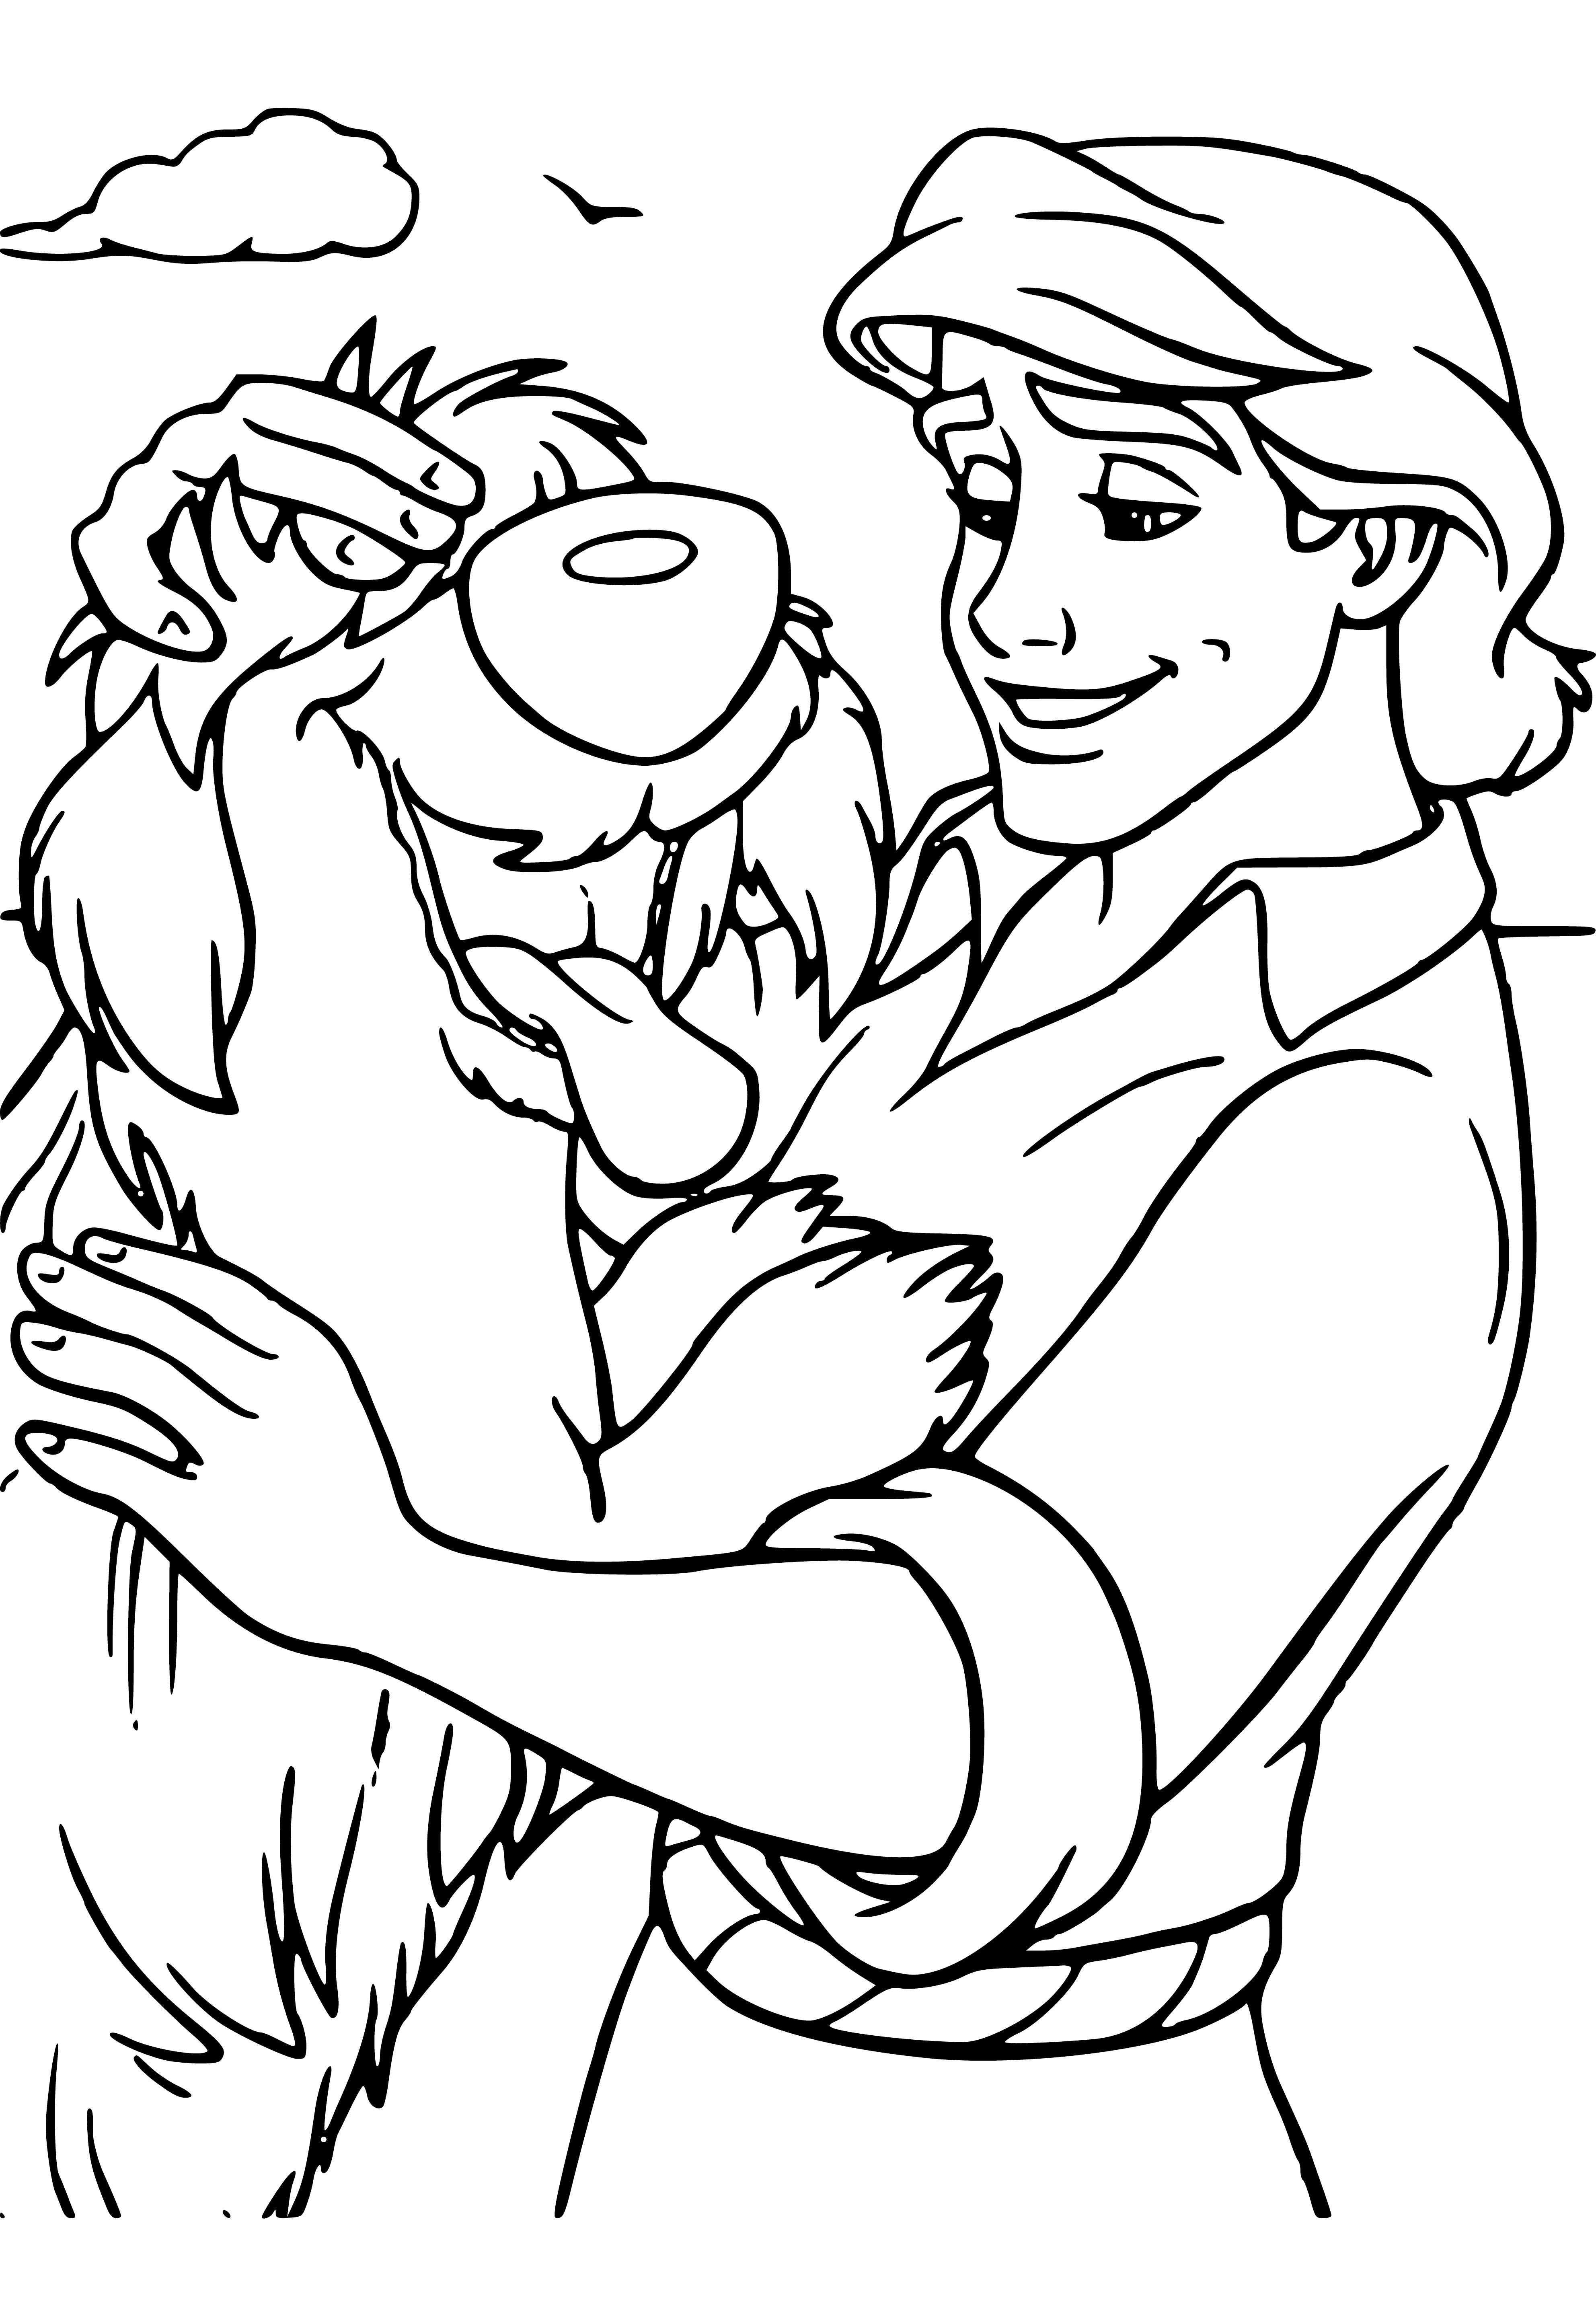 Prince and dog coloring page